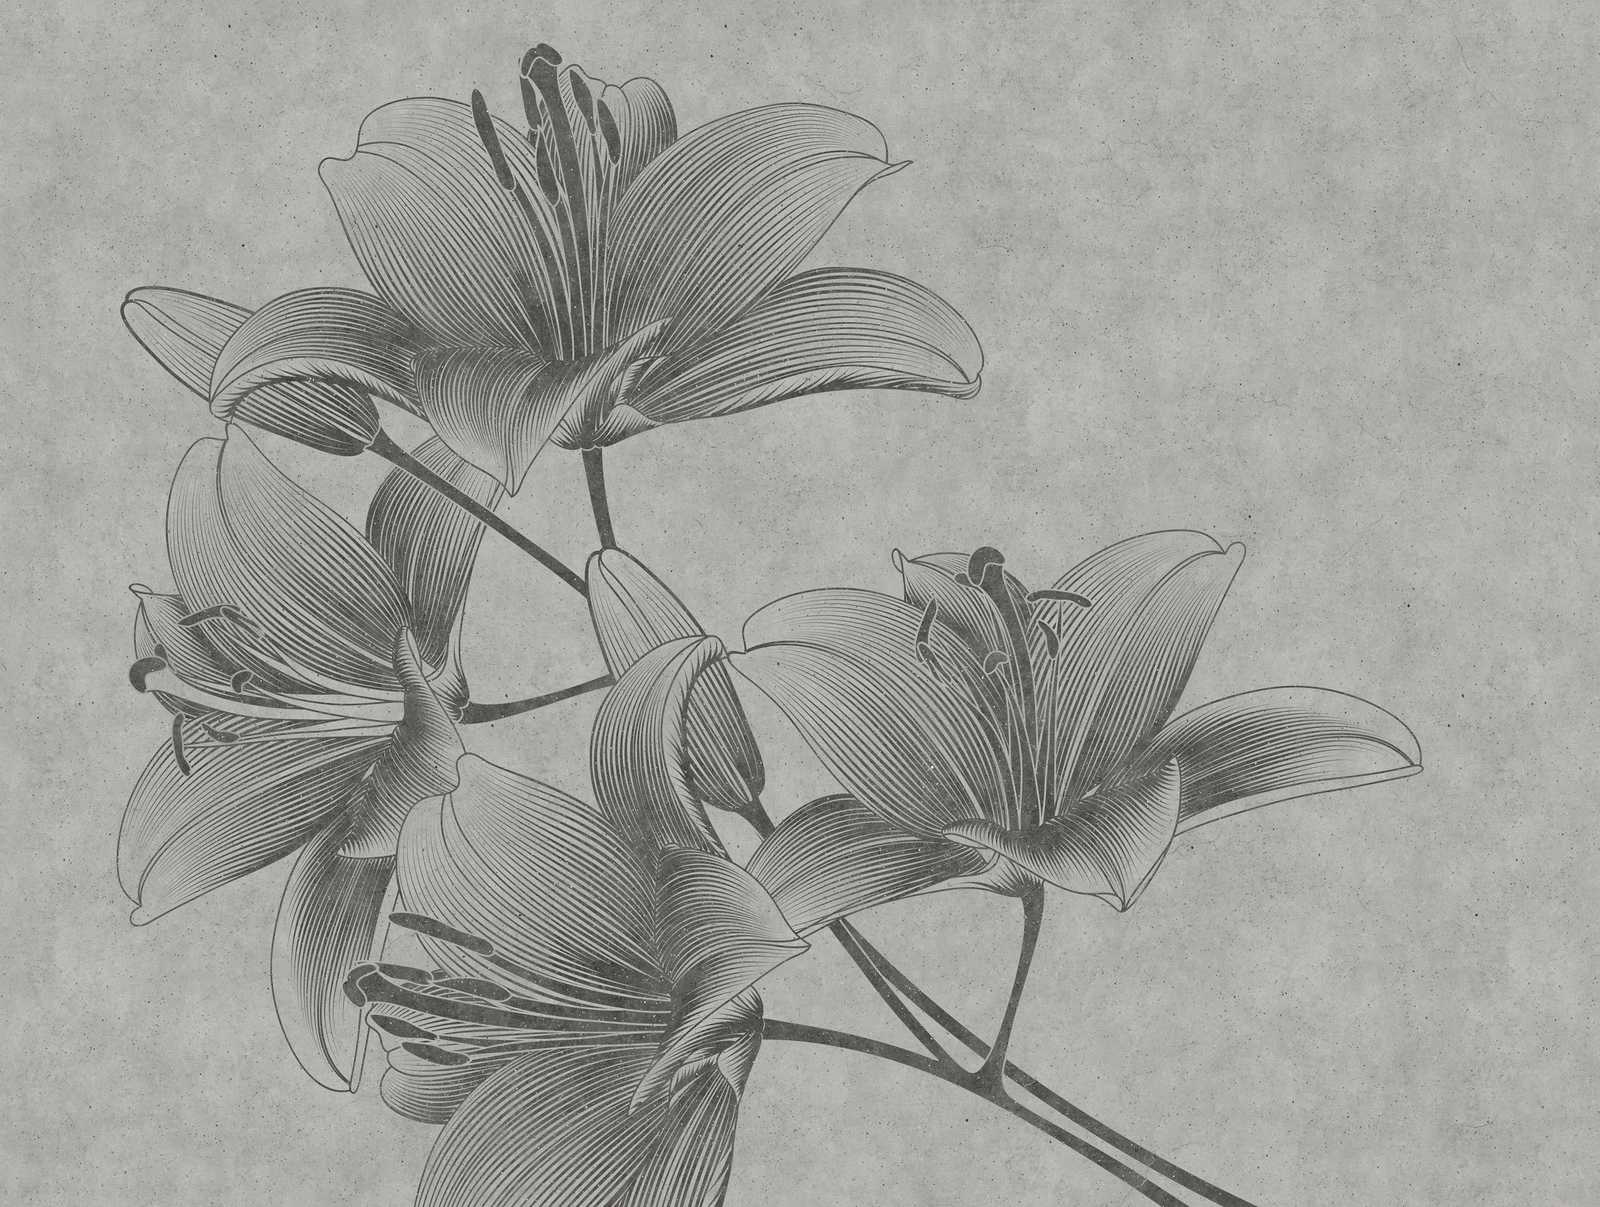             Wallpaper novelty | grey floral wallpaper lilies in line art style
        